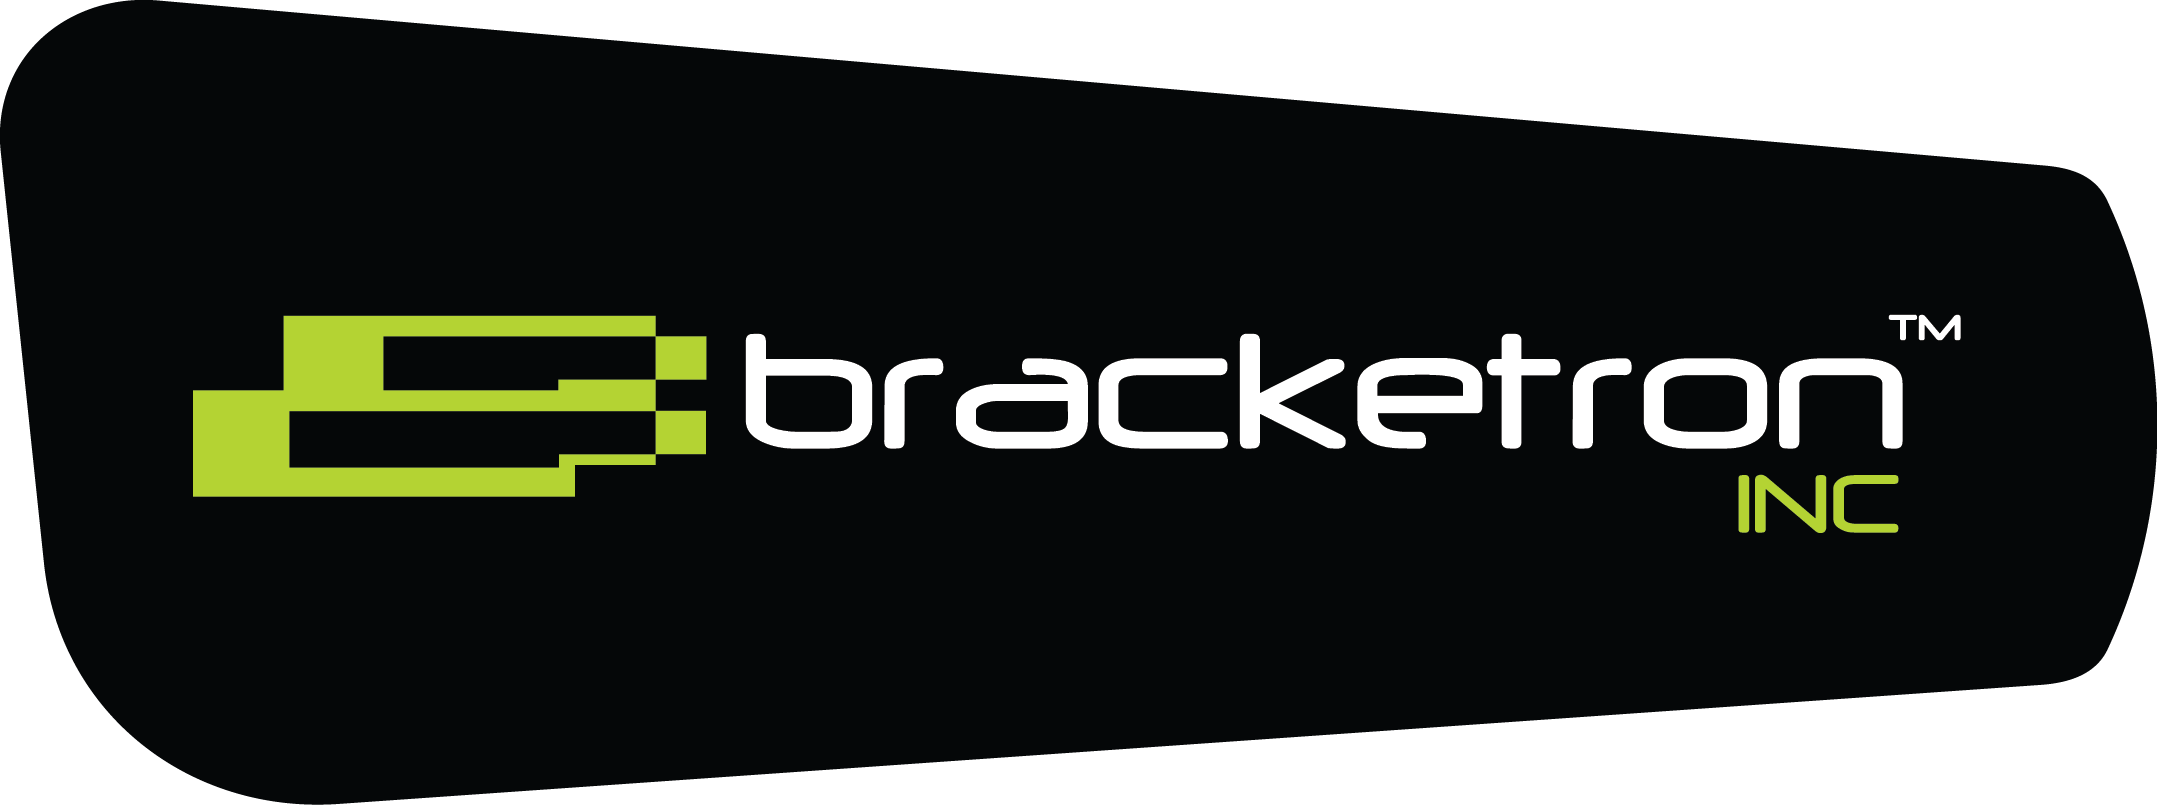 Bracketron manufactures laptop, tablet and phone mounts and is an industry leader in quality and affordability.